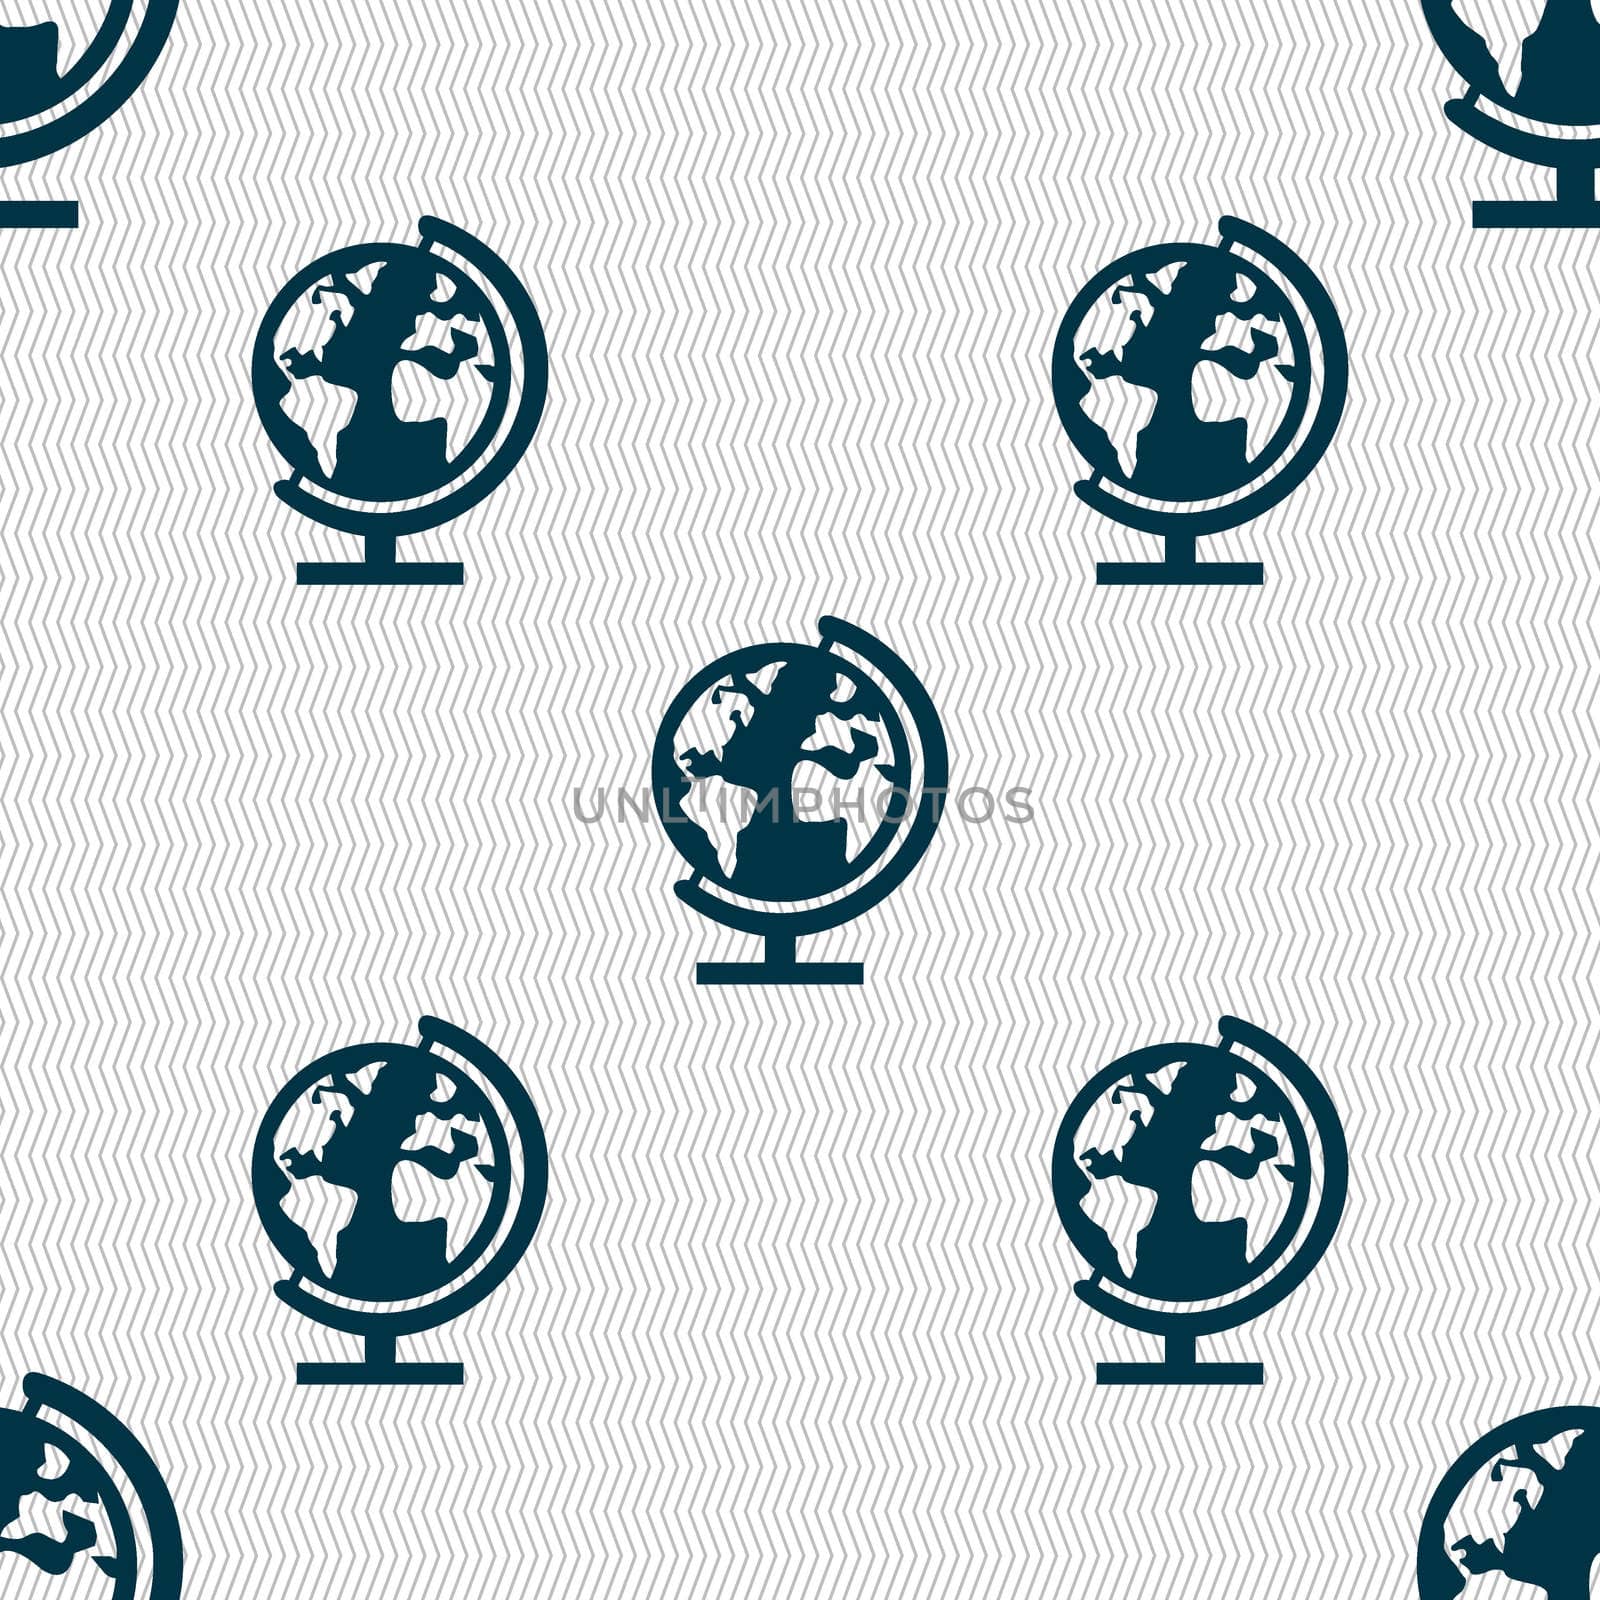 Globe sign icon. World map geography symbol. Globes on stand for studying. Seamless abstract background with geometric shapes. illustration